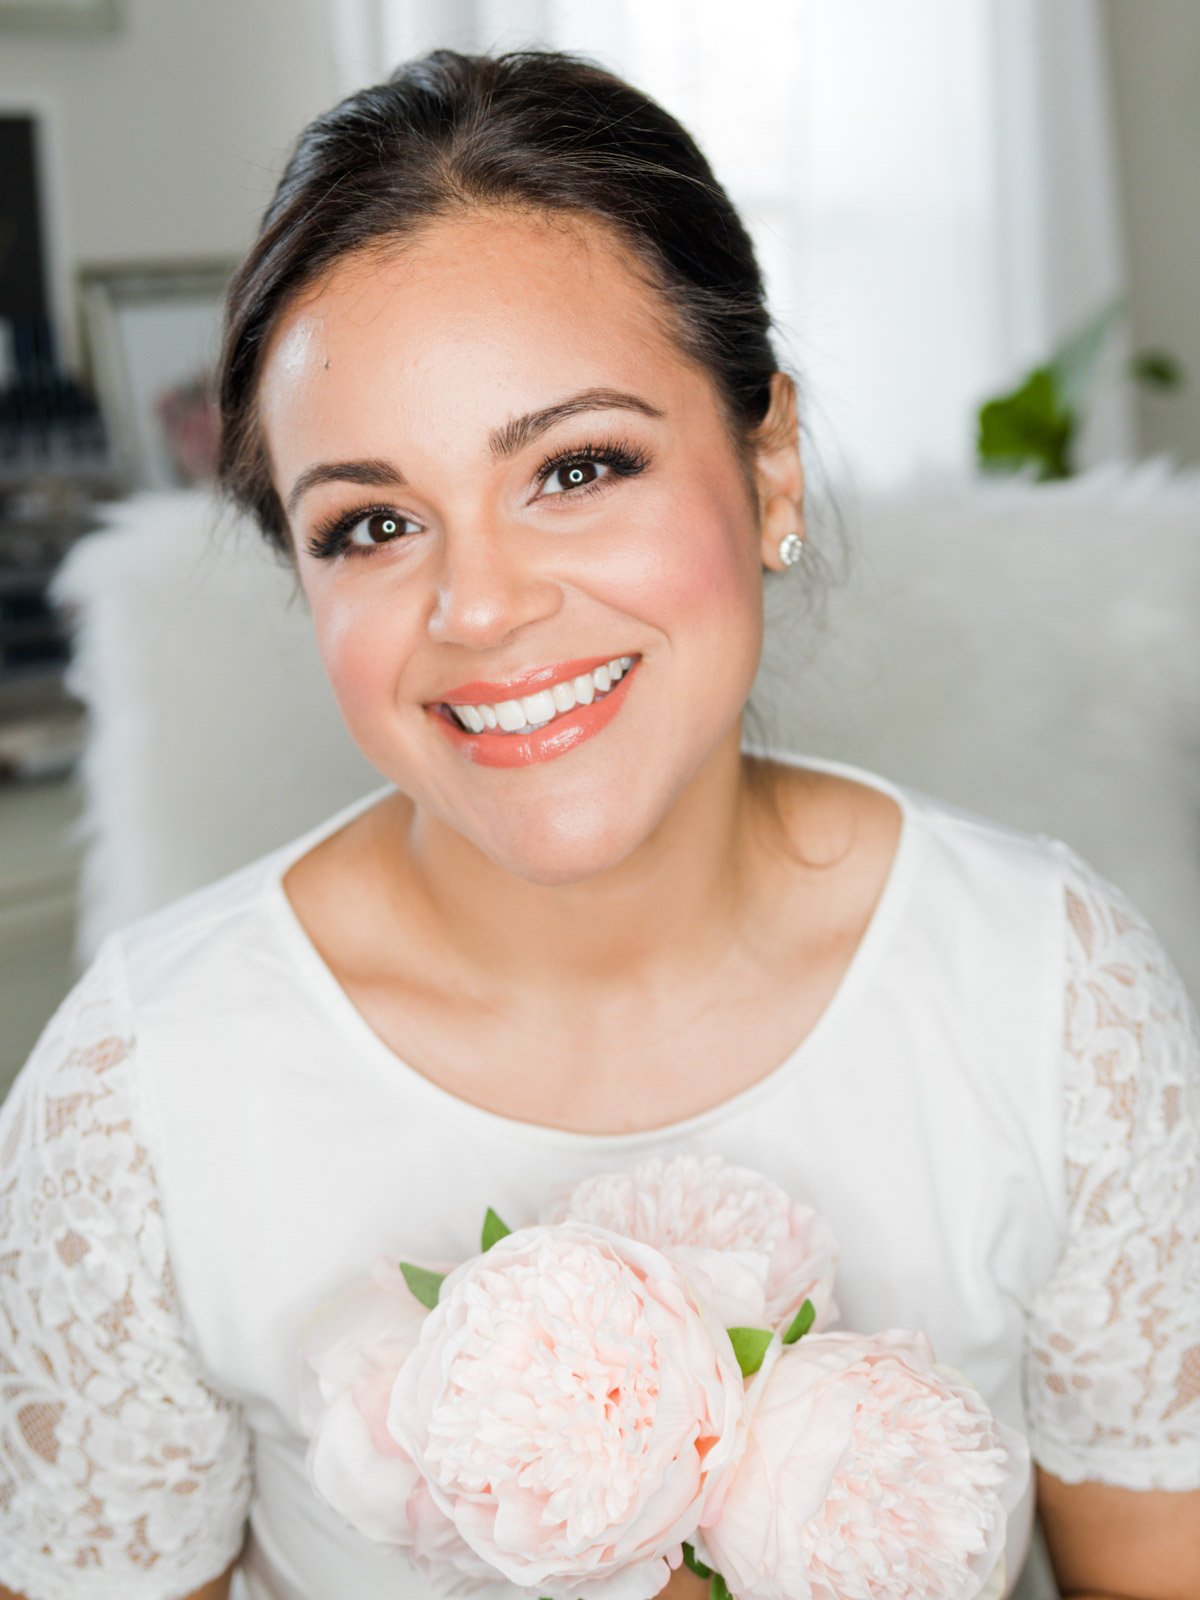 A bridal makeup tutorial using clean beauty products. This romantic makeup will look great on all skintones. #cleanbeauty #bridalmakeup #makeuptutorial #cleanbeautyproject 